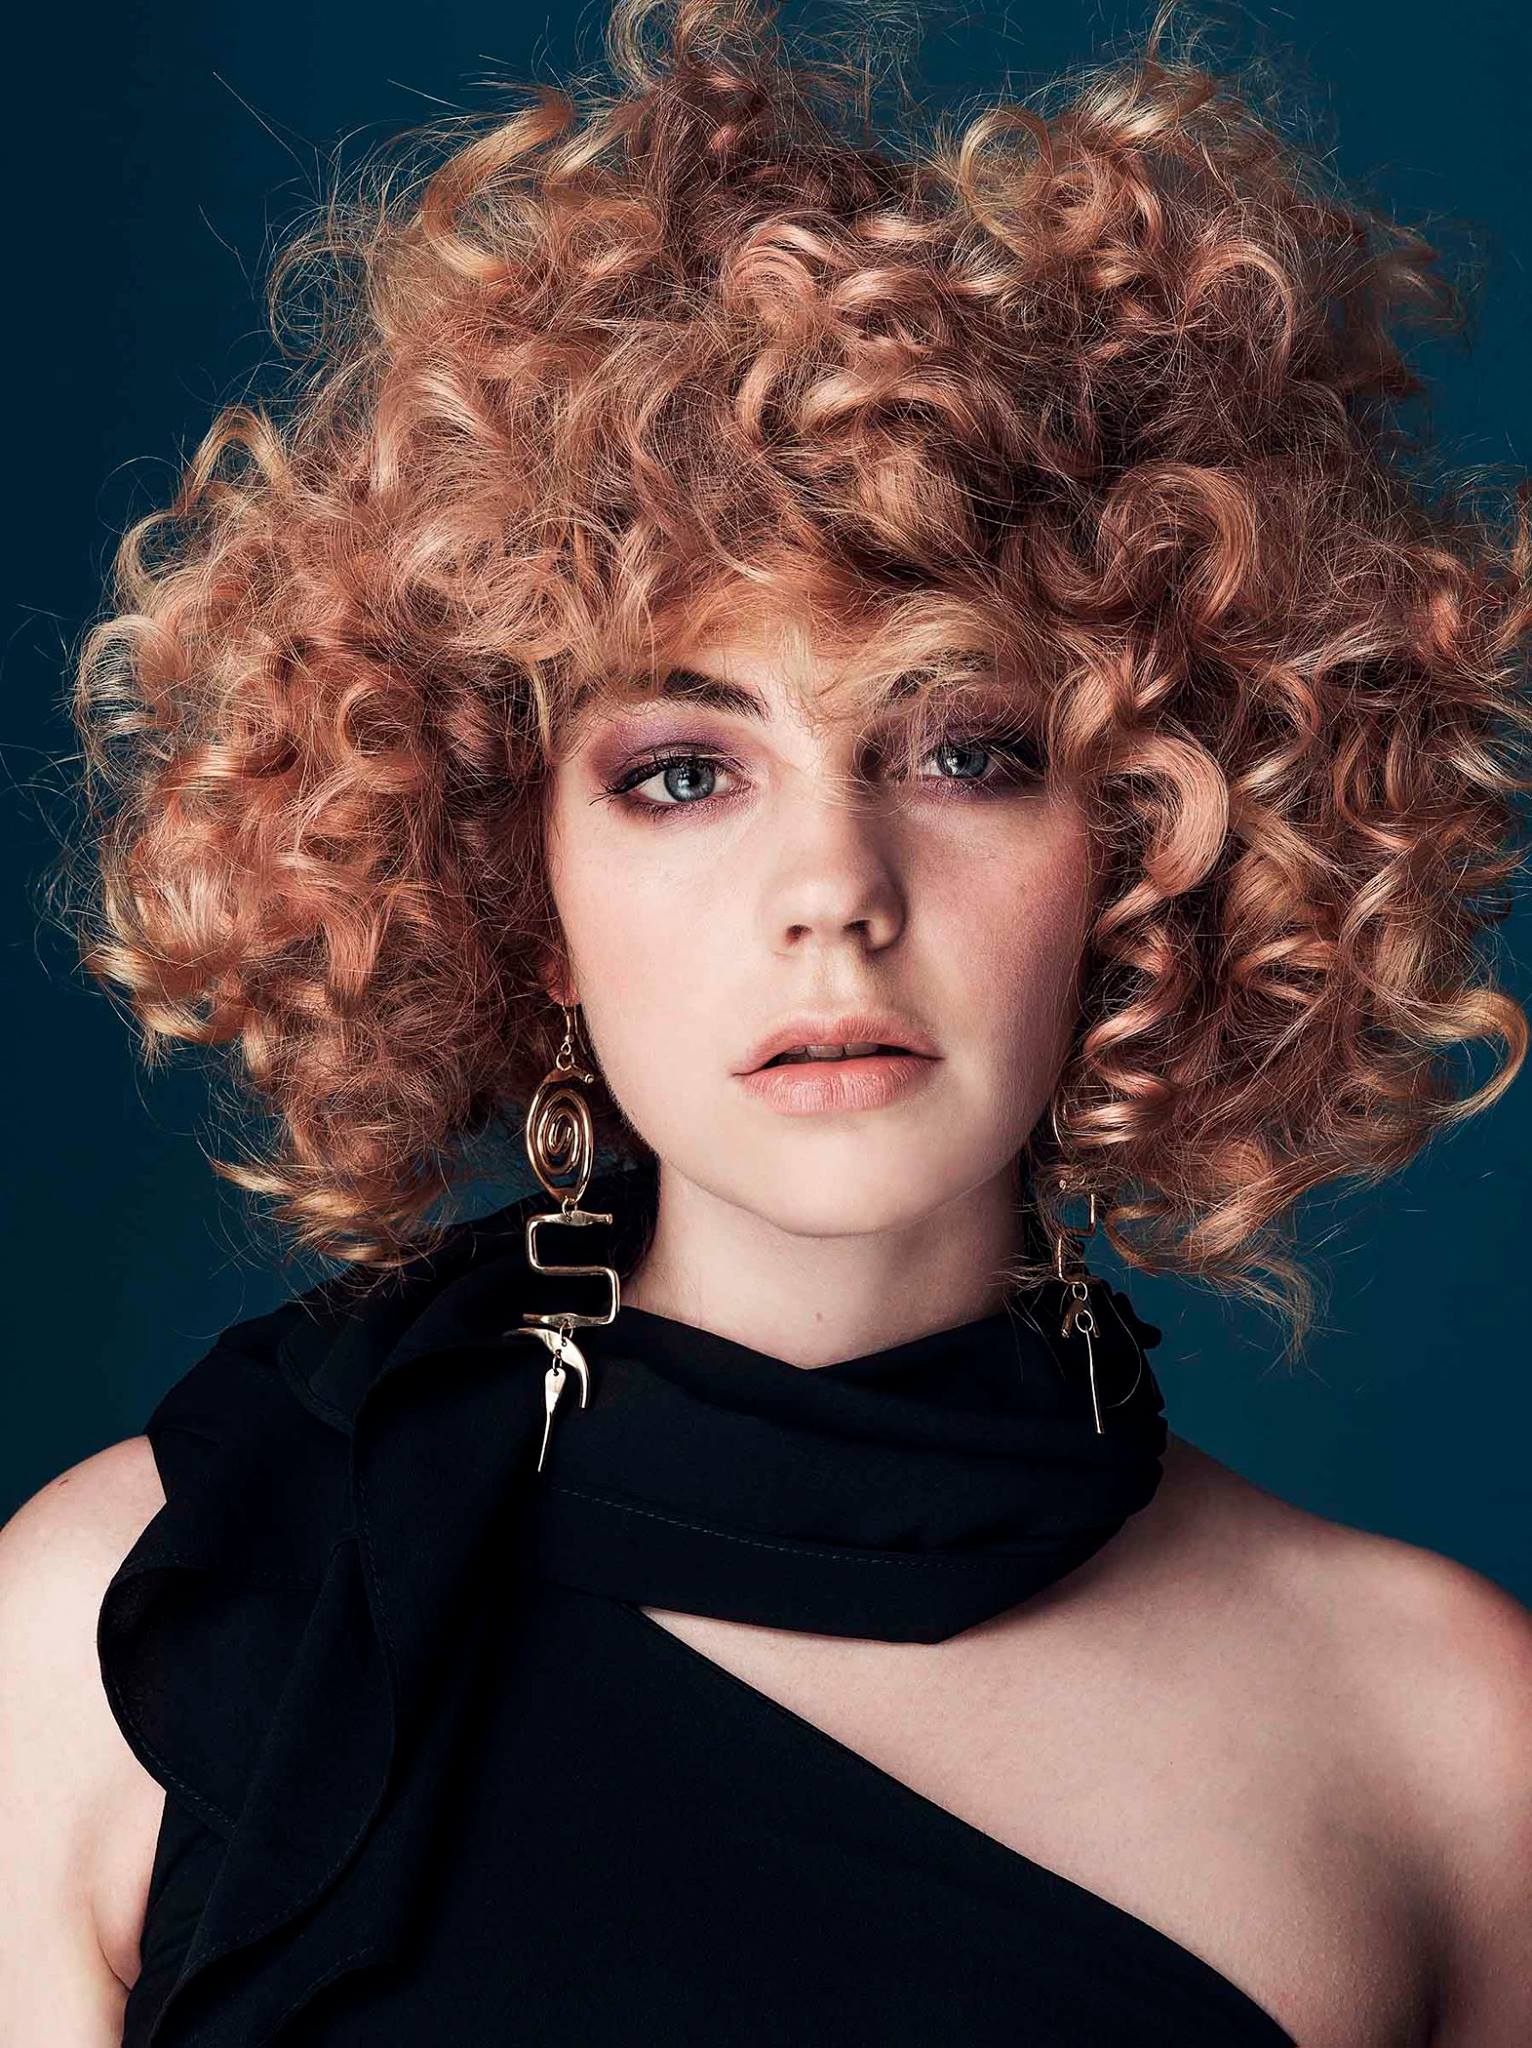 Andrew Cobeldick – MiNDFOOD Magazine Award Winner AND Young Talent Award Winner - L'Oreal Style and Colour Trophy Awards 2016.